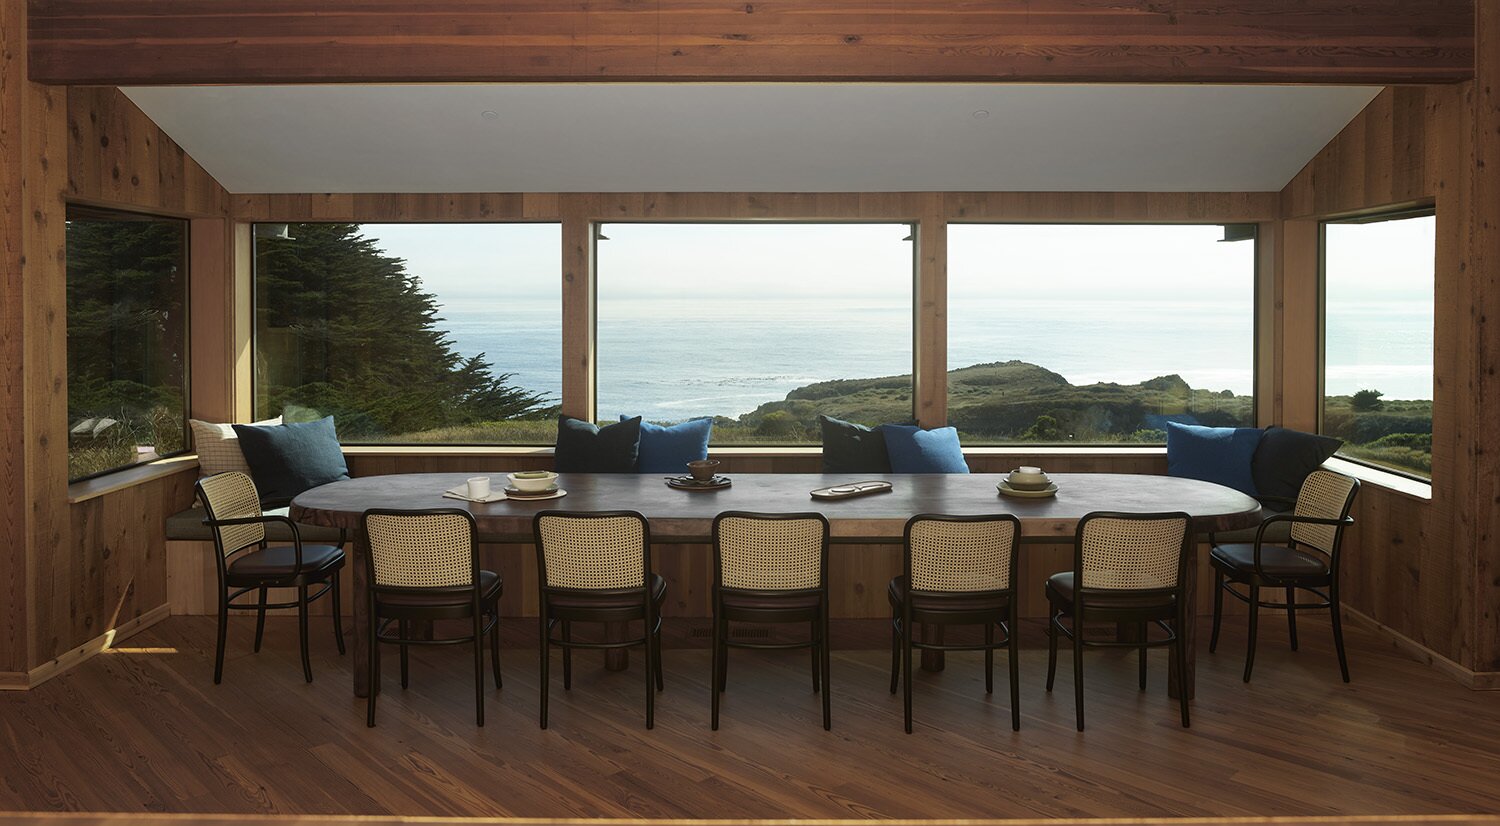 Following a Two-Year Renovation, Northern California’s Sea Ranch Lodge Reopens This Fall